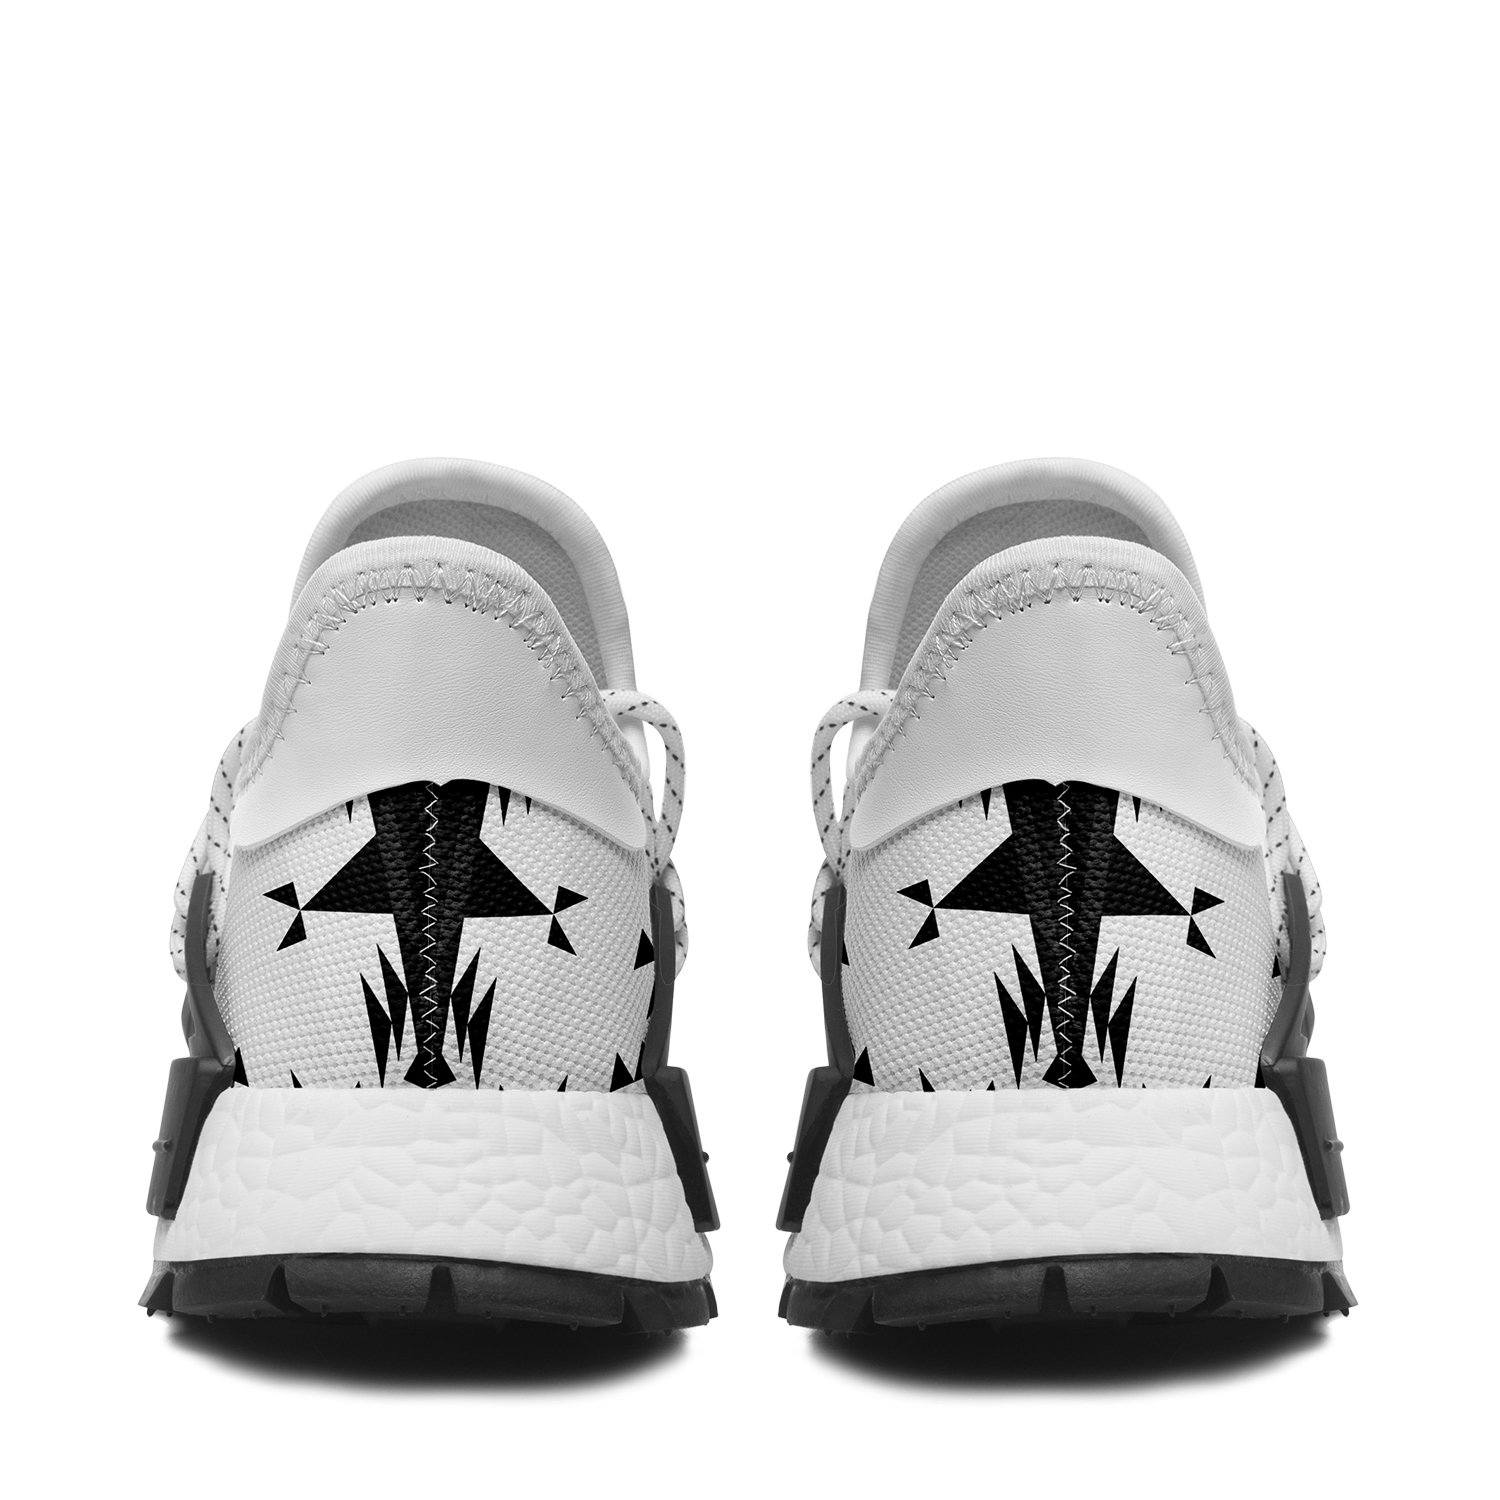 Between the Mountains White and Black Okaki Sneakers Shoes 49 Dzine 